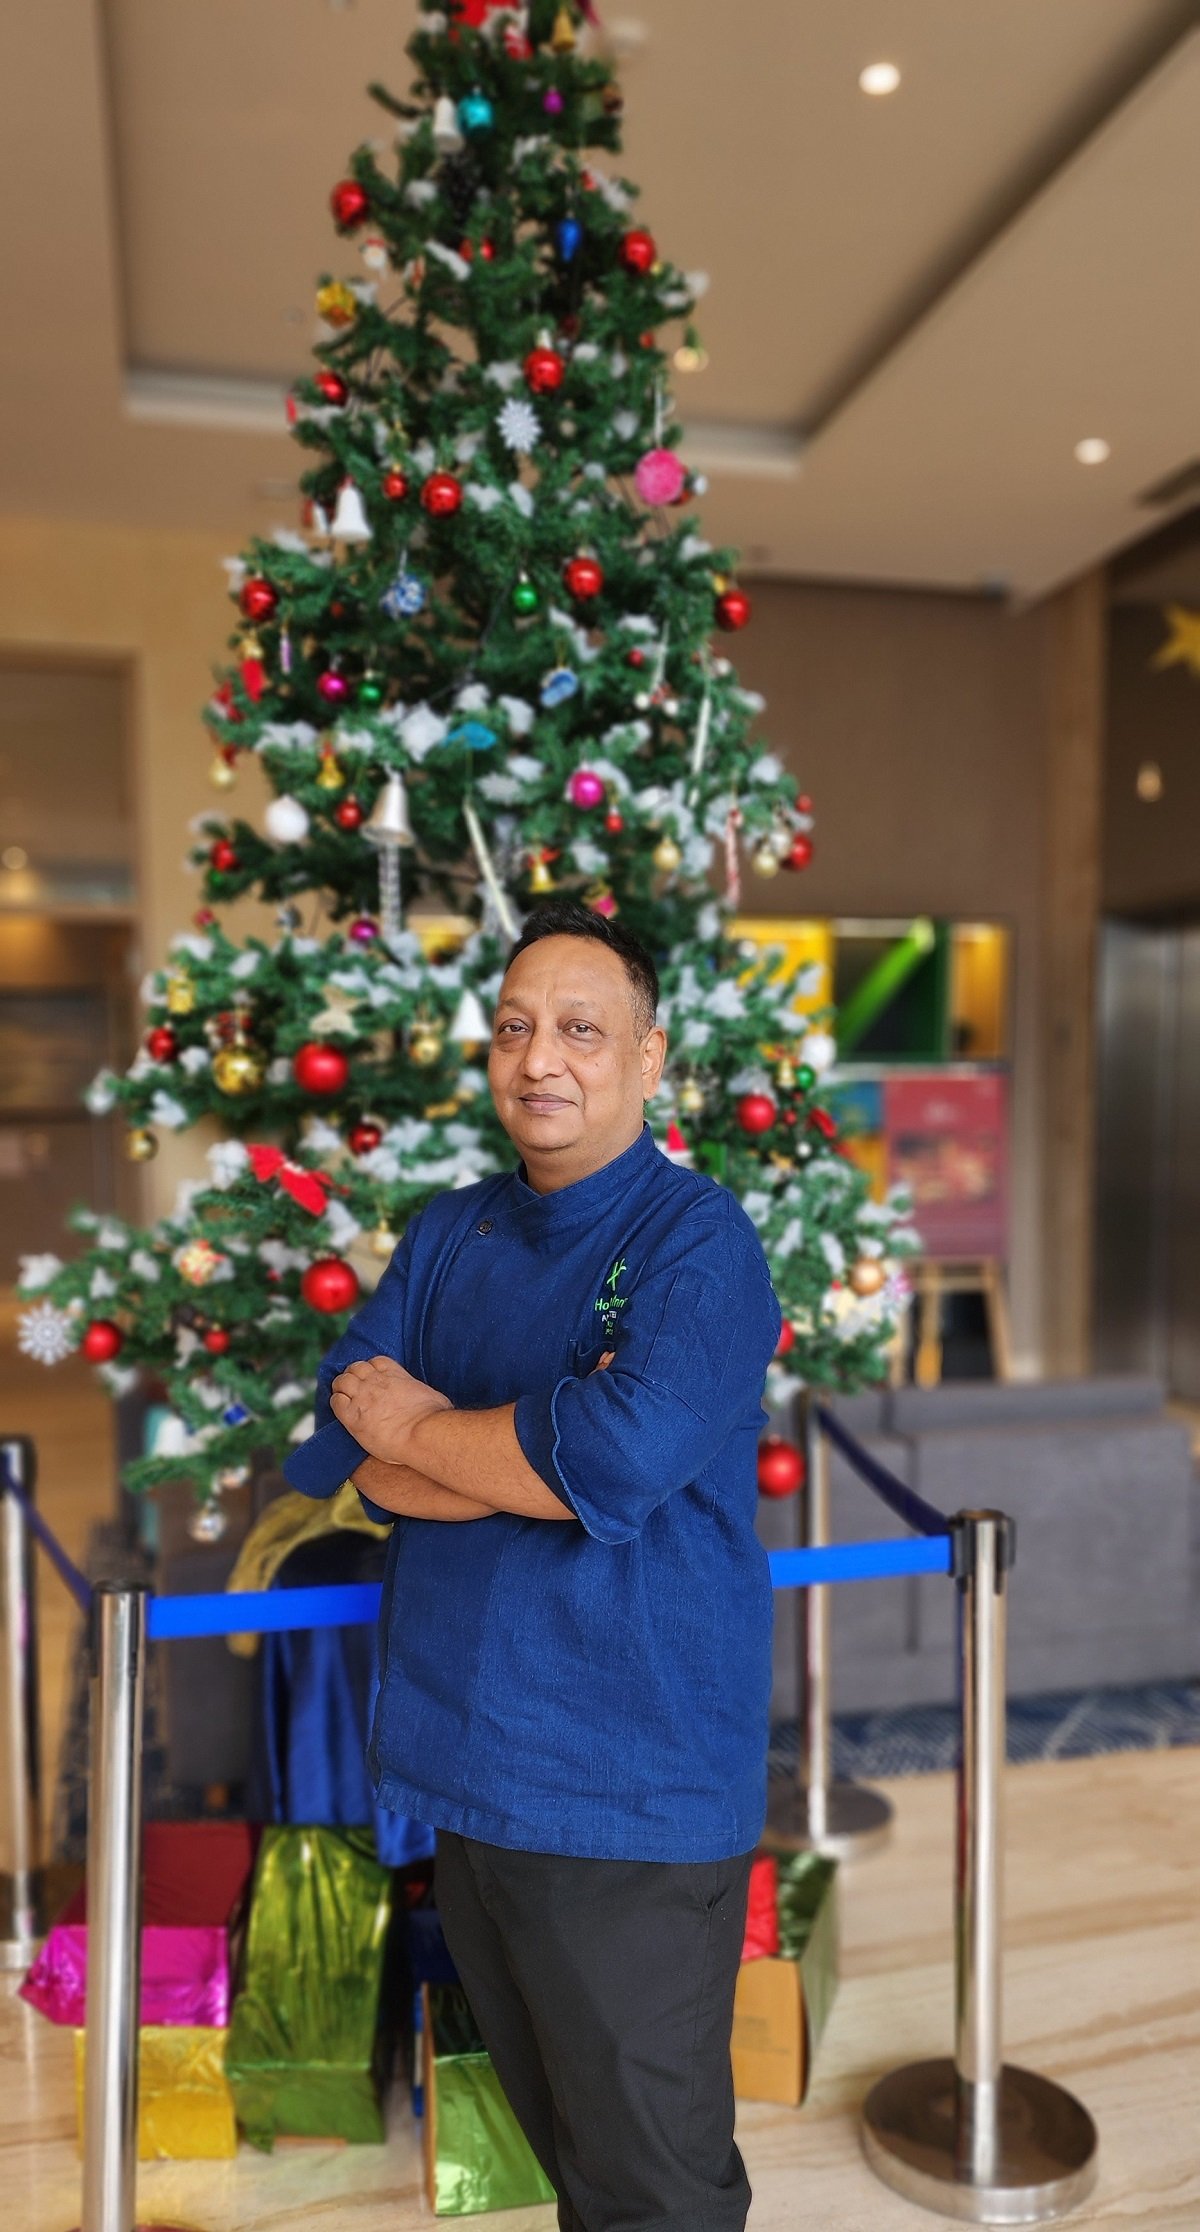 Holiday Inn Bengaluru Racecourse announced the appointment of Ajit Tiwari as their Executive Chef